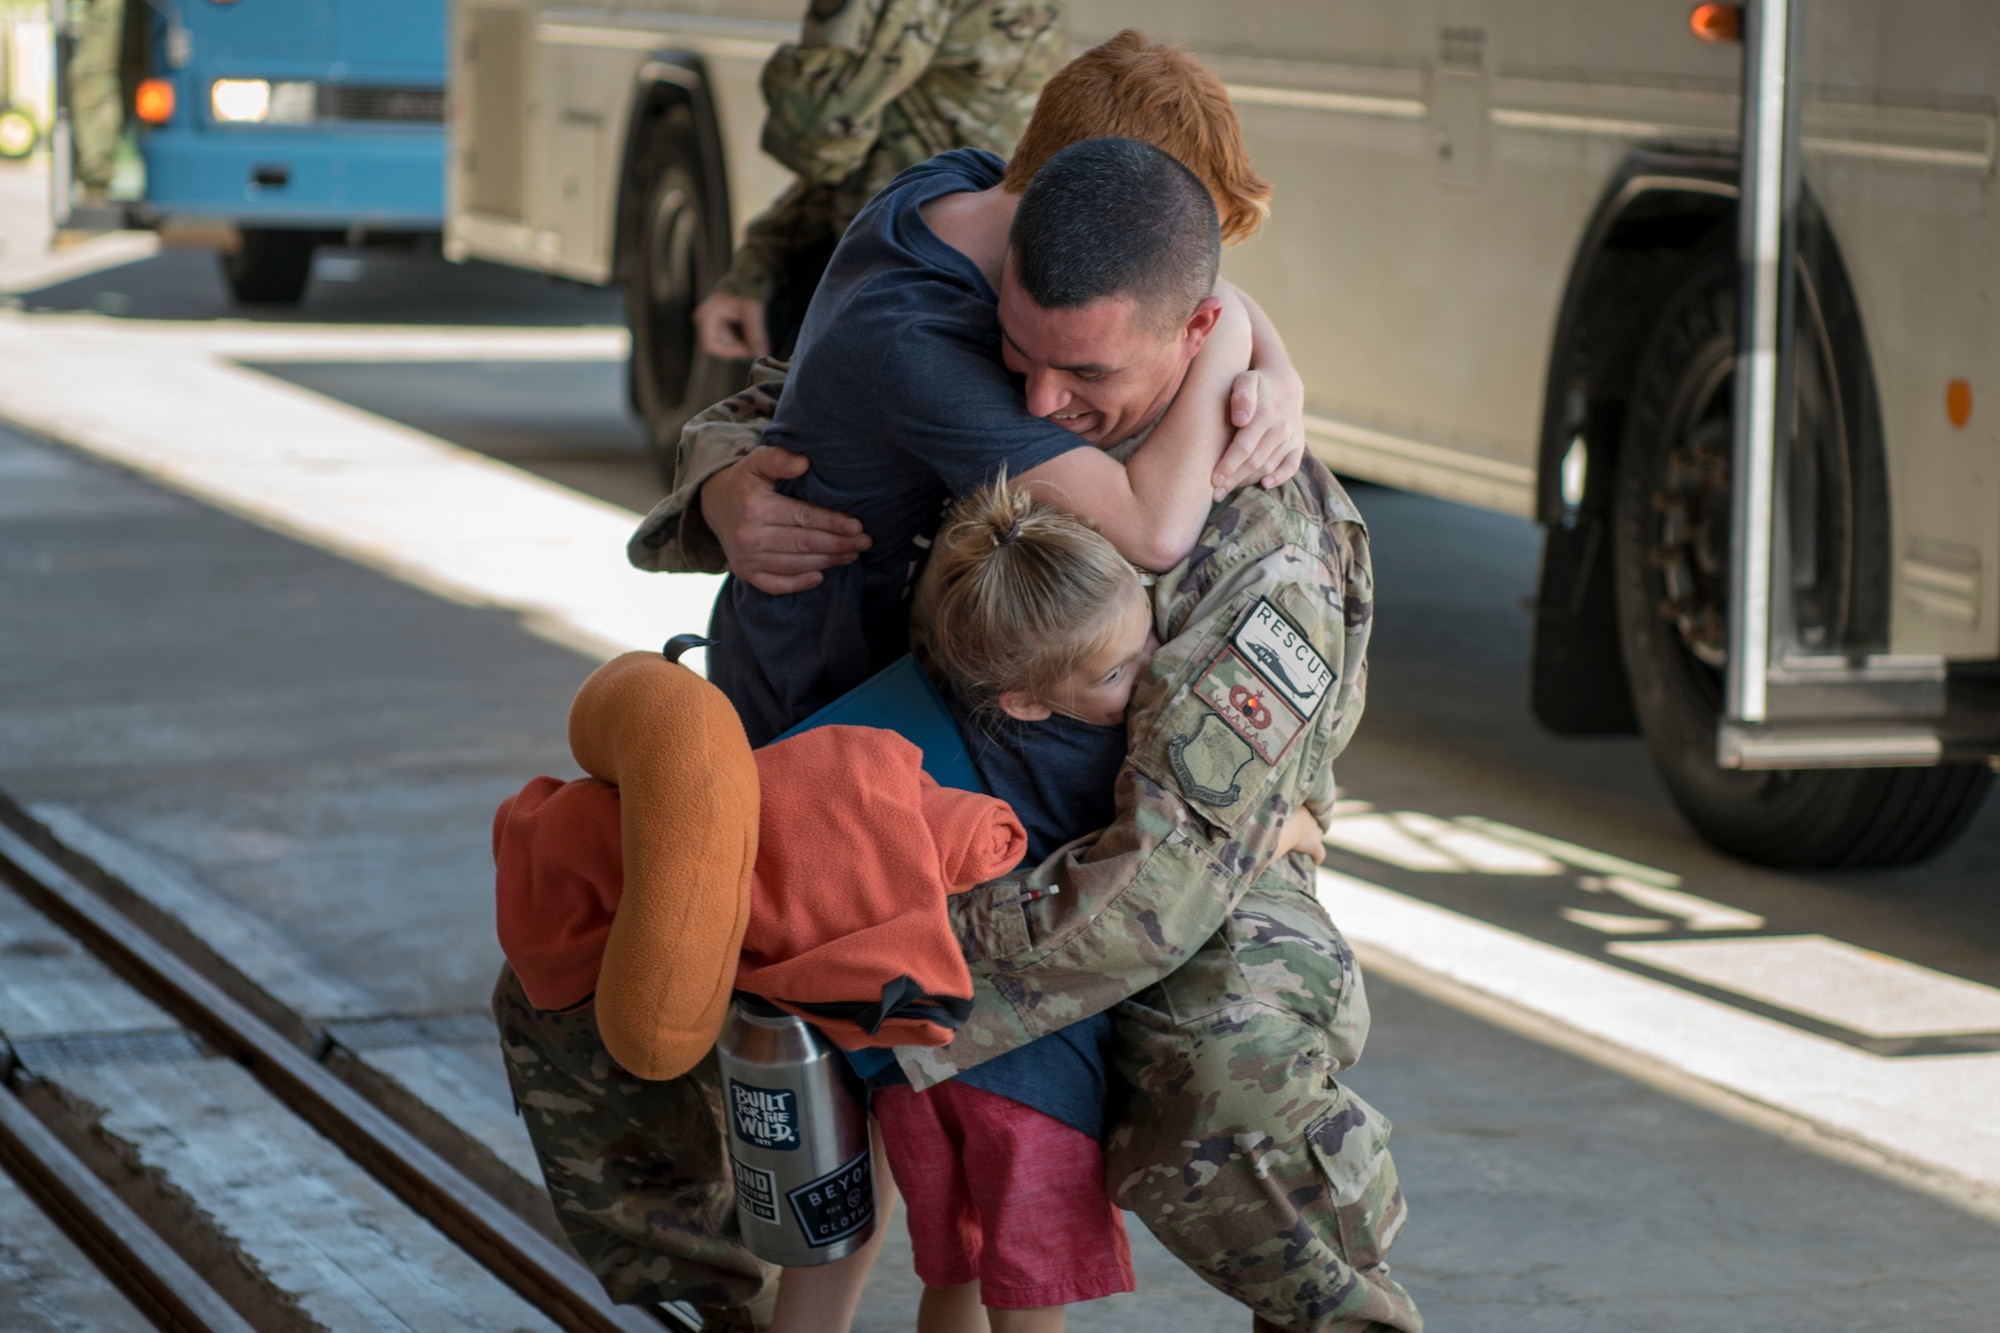 An Airman reunites with his family during the 41st Rescue Squadron’s (RQS) redeployment ceremony, July 10, 2018, at Moody Air Force Base, Ga. While deployed, the 41st RQS and the 41st Helicopter Maintenance Unit provided combat search and rescue capabilities and maintenance operations in support of Combined Joint Task Force-Horn of Africa. (U.S. Air Force photo by Airman Taryn Butler)